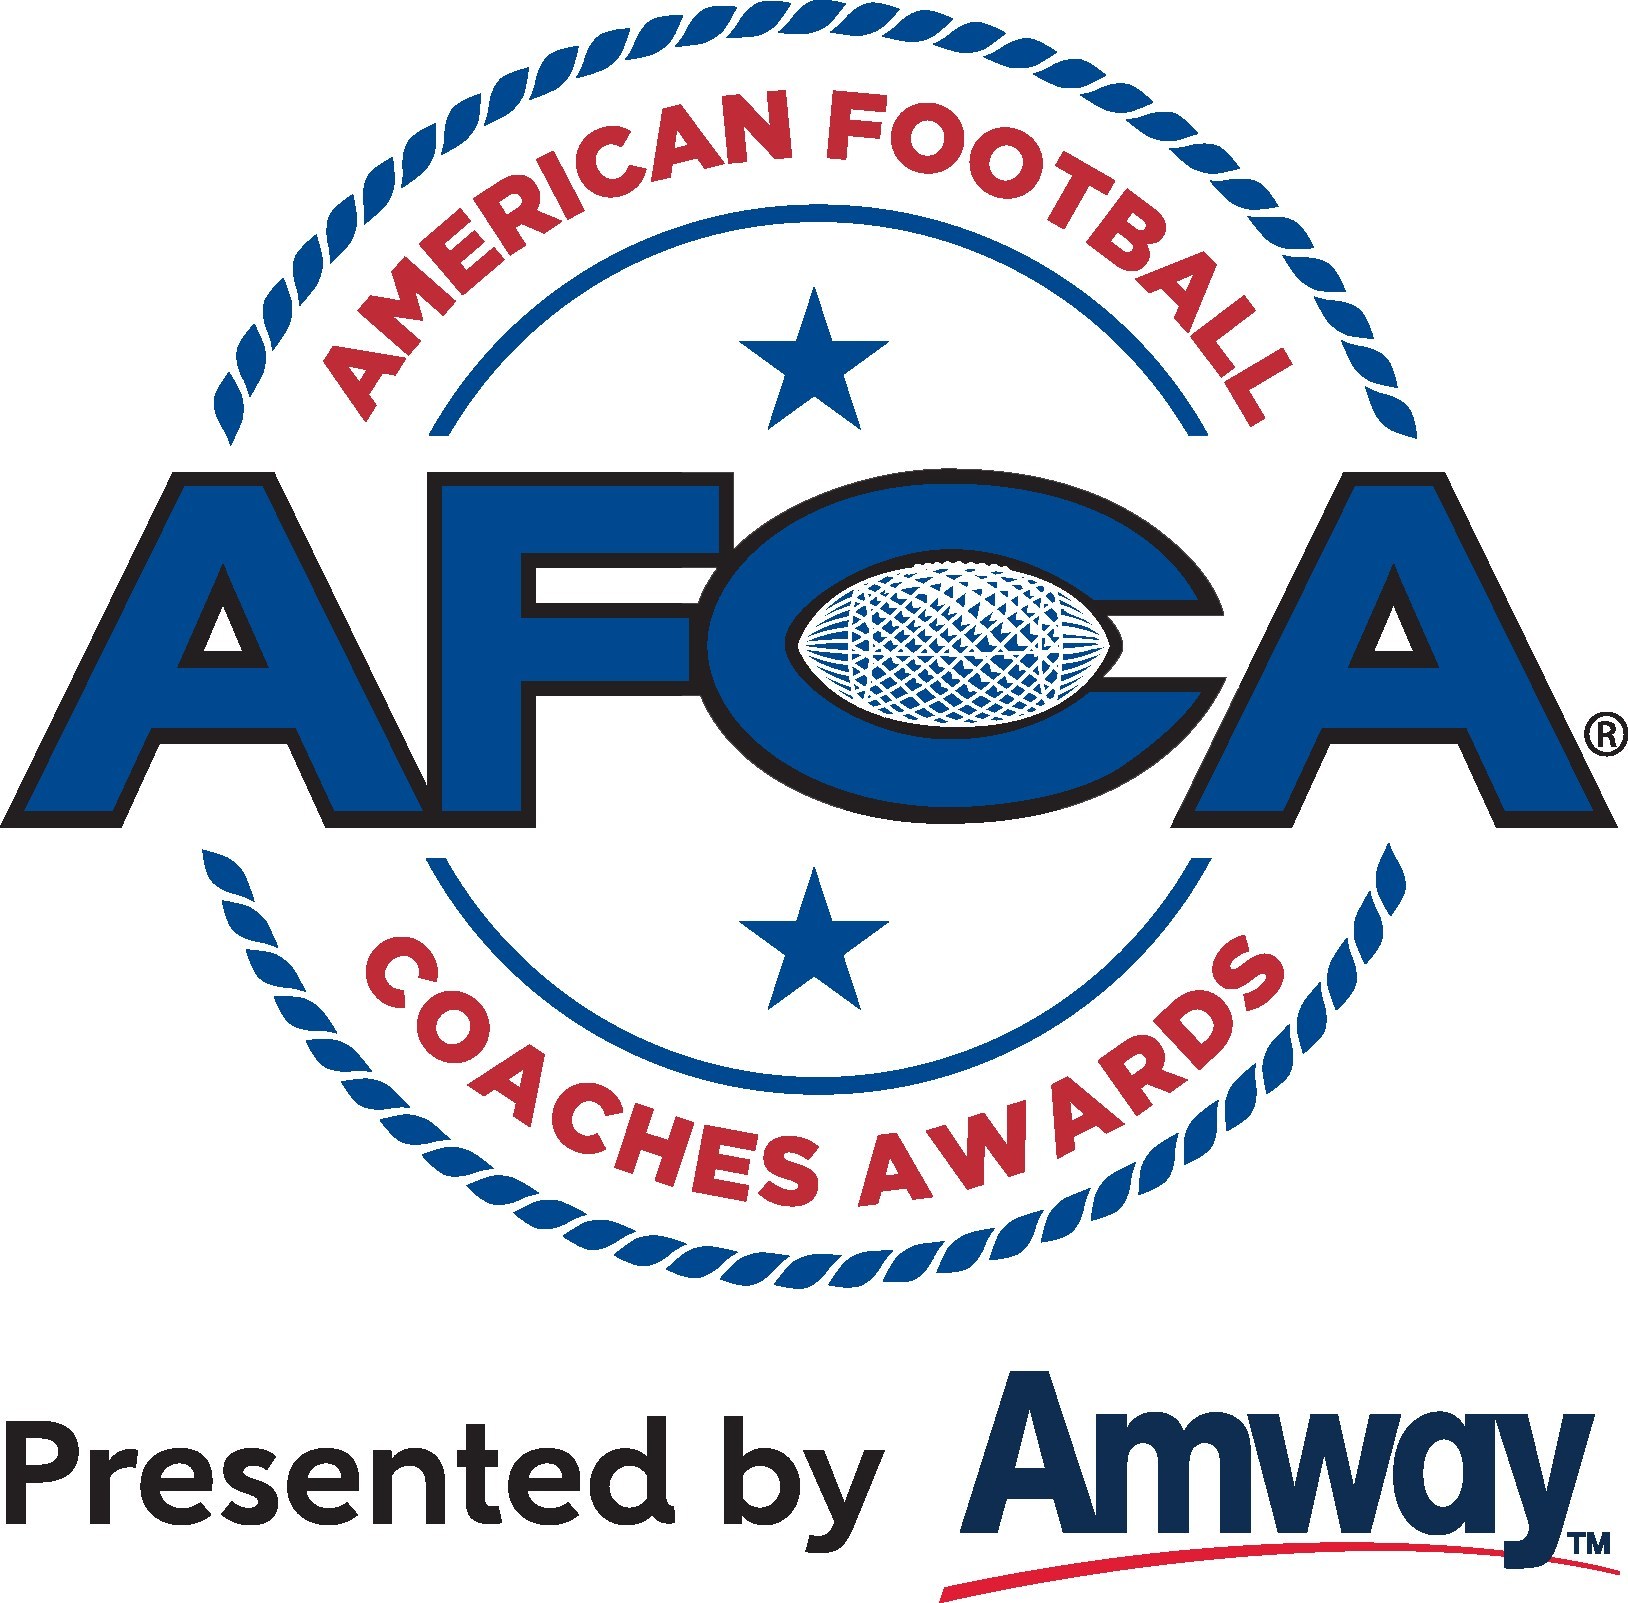 Amway Offers College Football Fans An Opportunity To Meet Coaches And